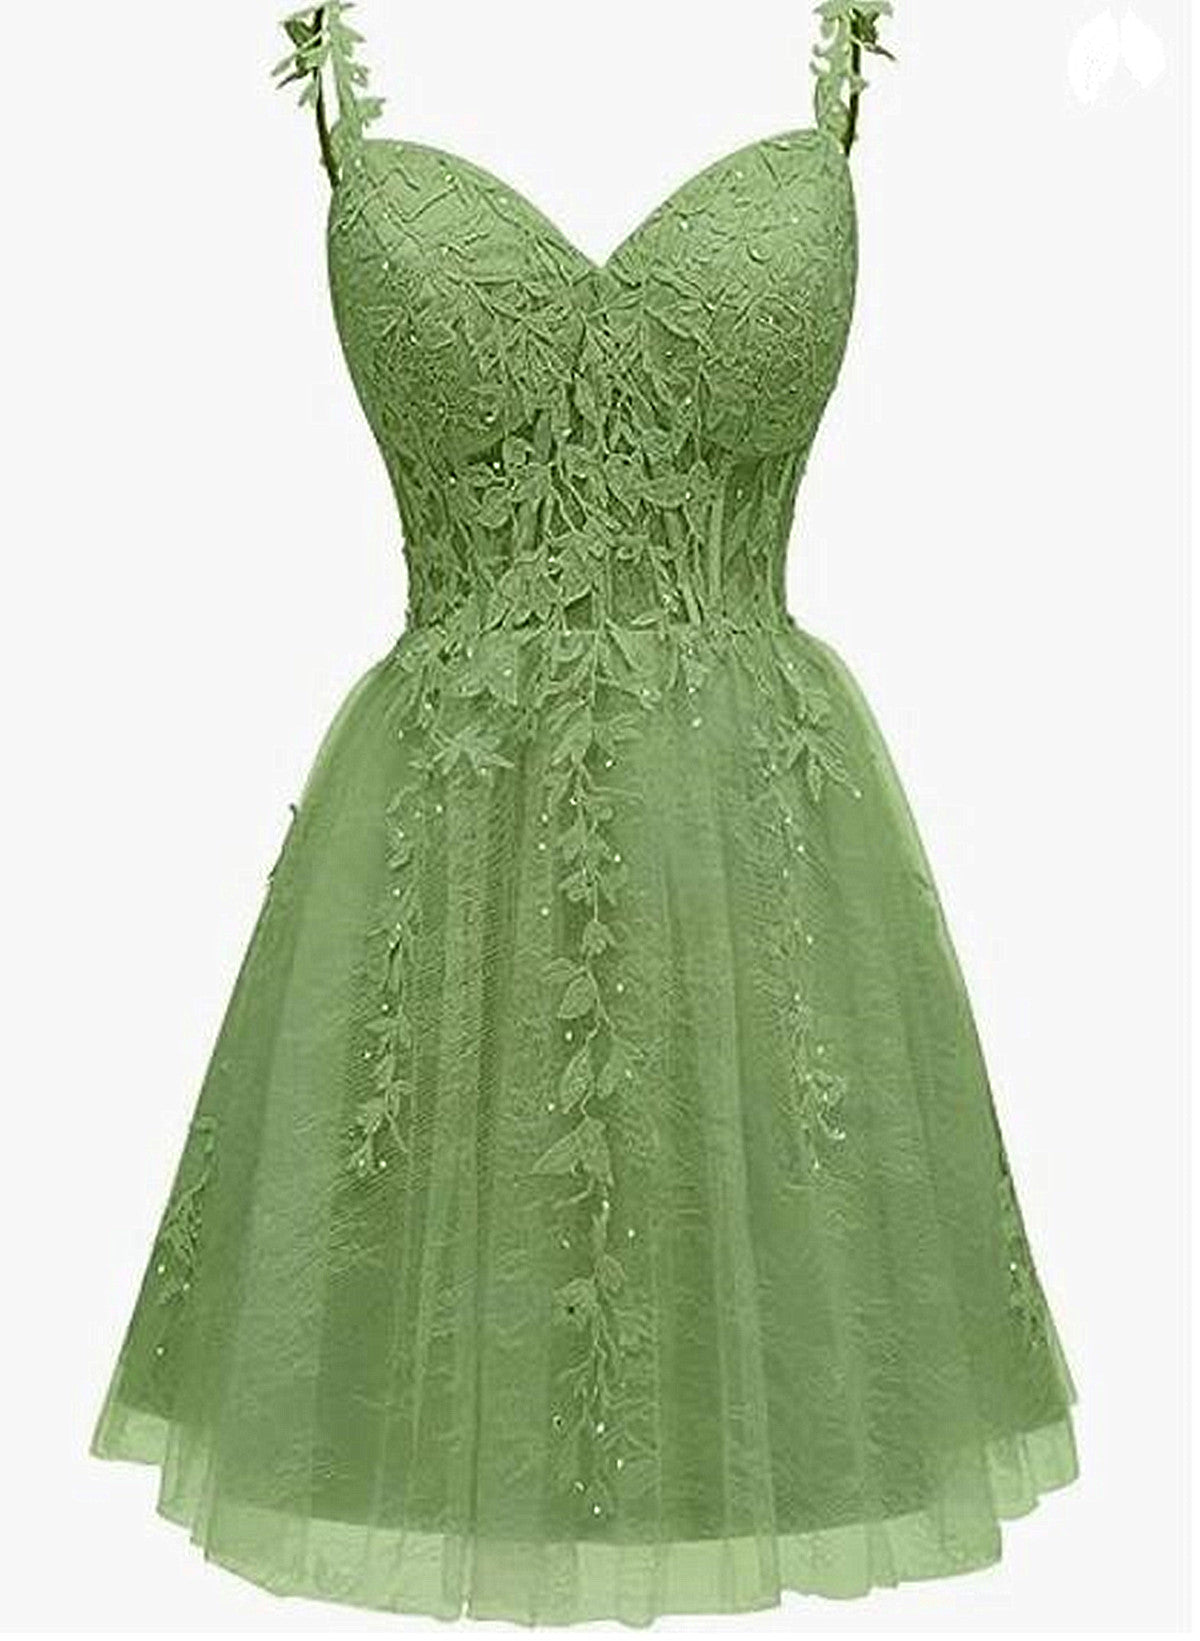 Lovely Green Sweetheart Beaded Straps Party Dress Outfits For Girls, Green Tulle Homecoming Dress